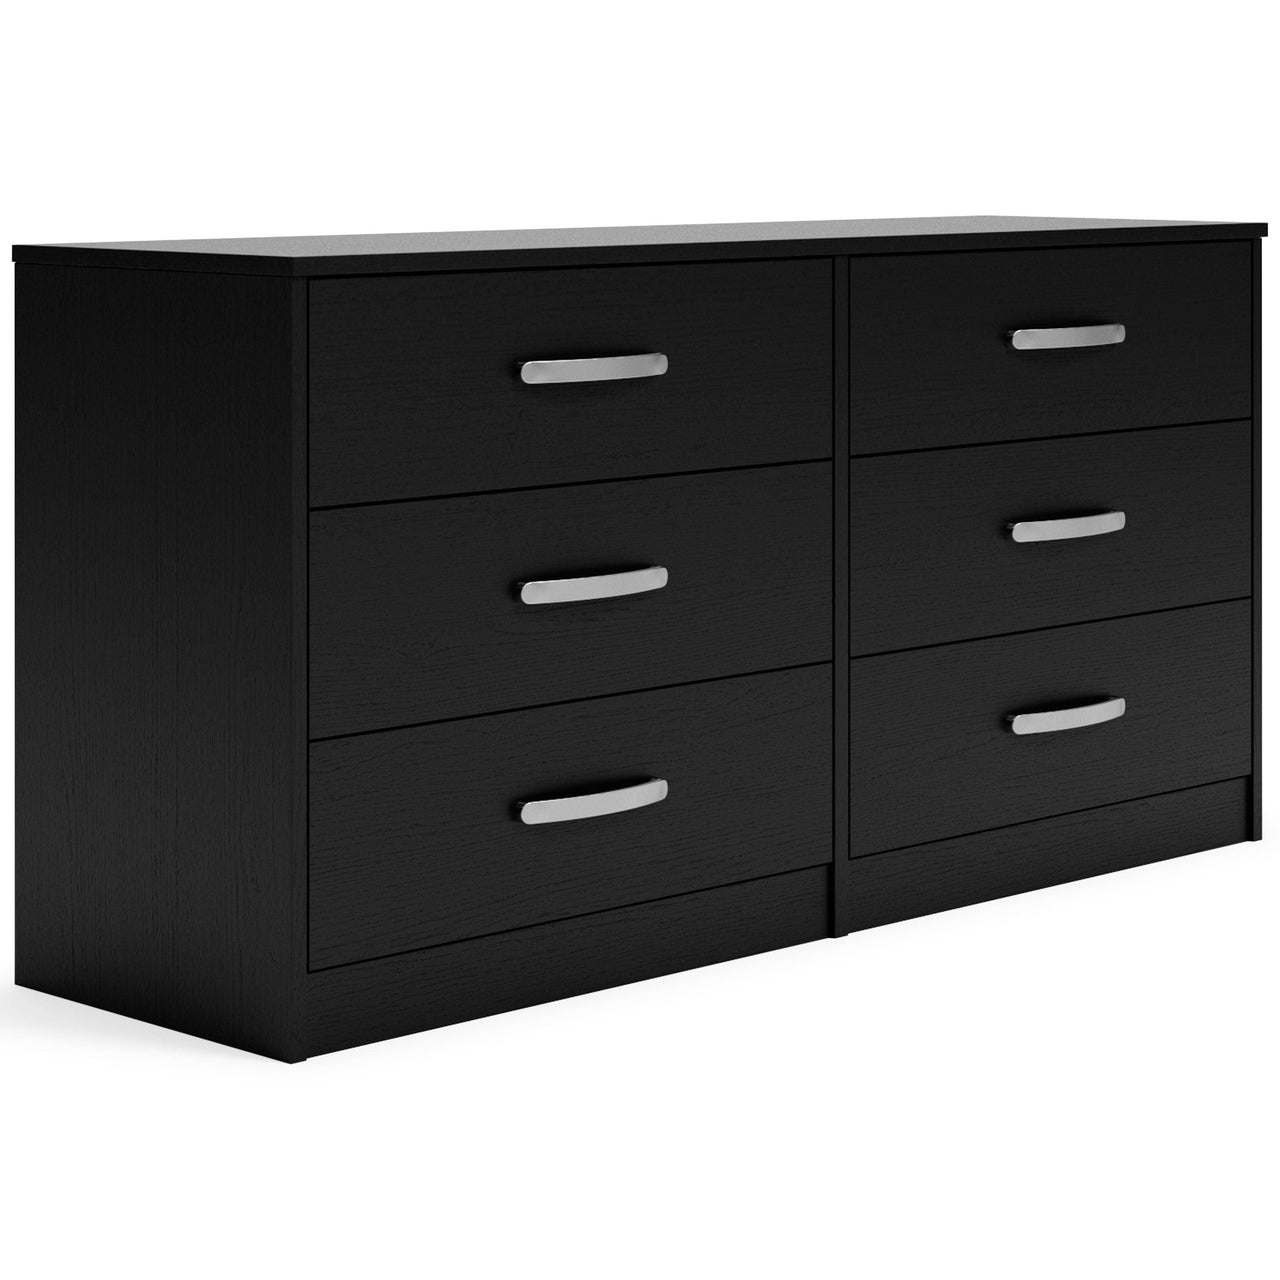 Finch - Black - Six Drawer Dresser - 29'' Height Tony's Home Furnishings Furniture. Beds. Dressers. Sofas.